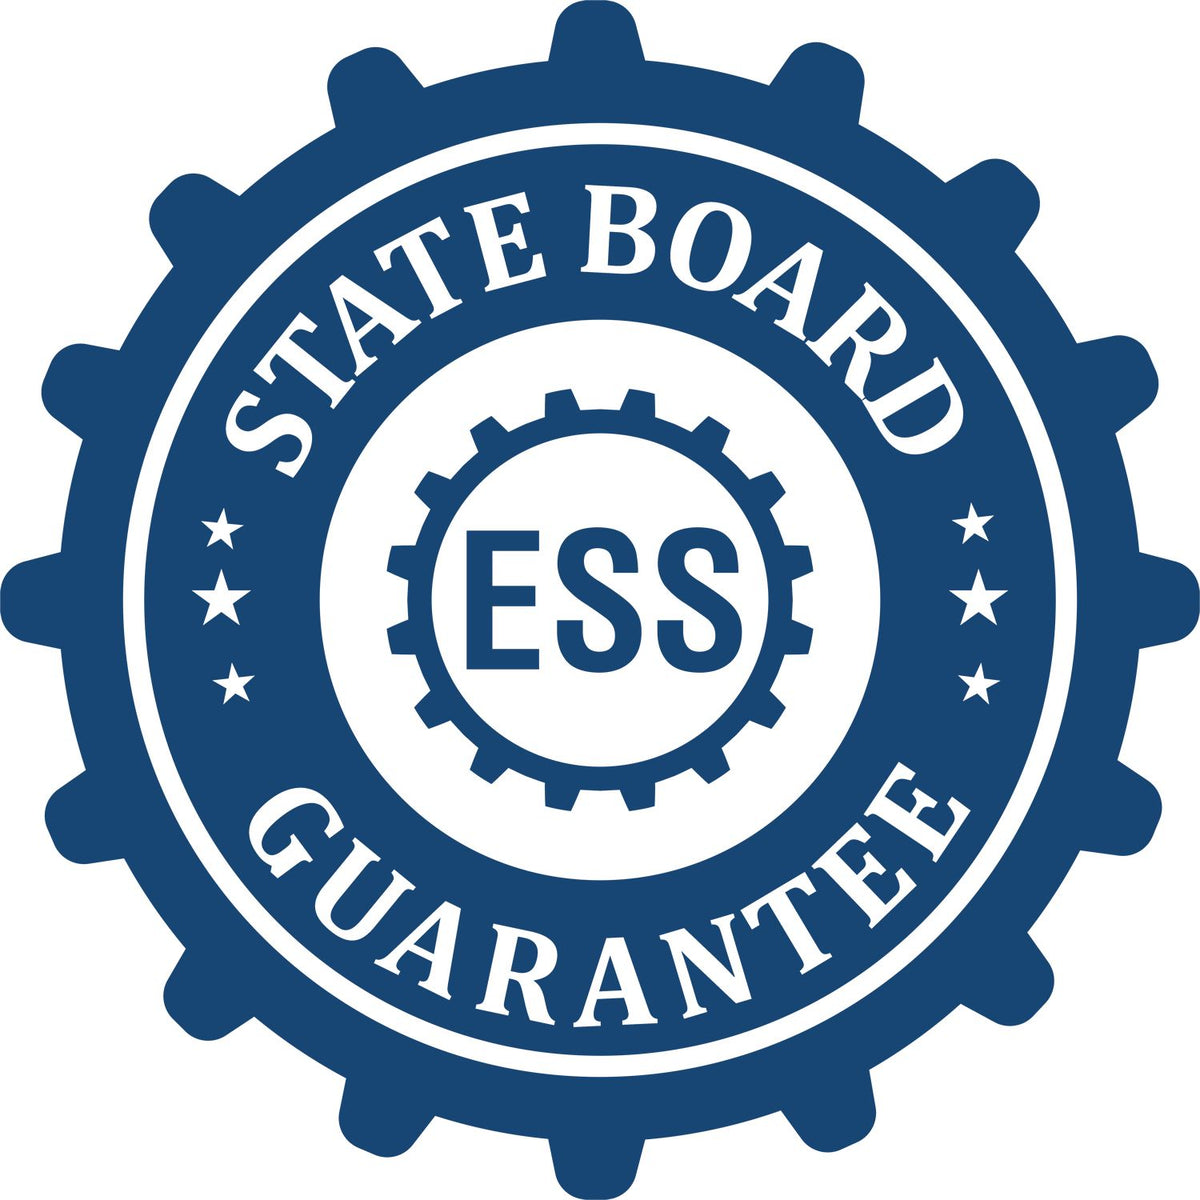 An emblem in a gear shape illustrating a state board guarantee for the Hybrid Arizona Geologist Seal